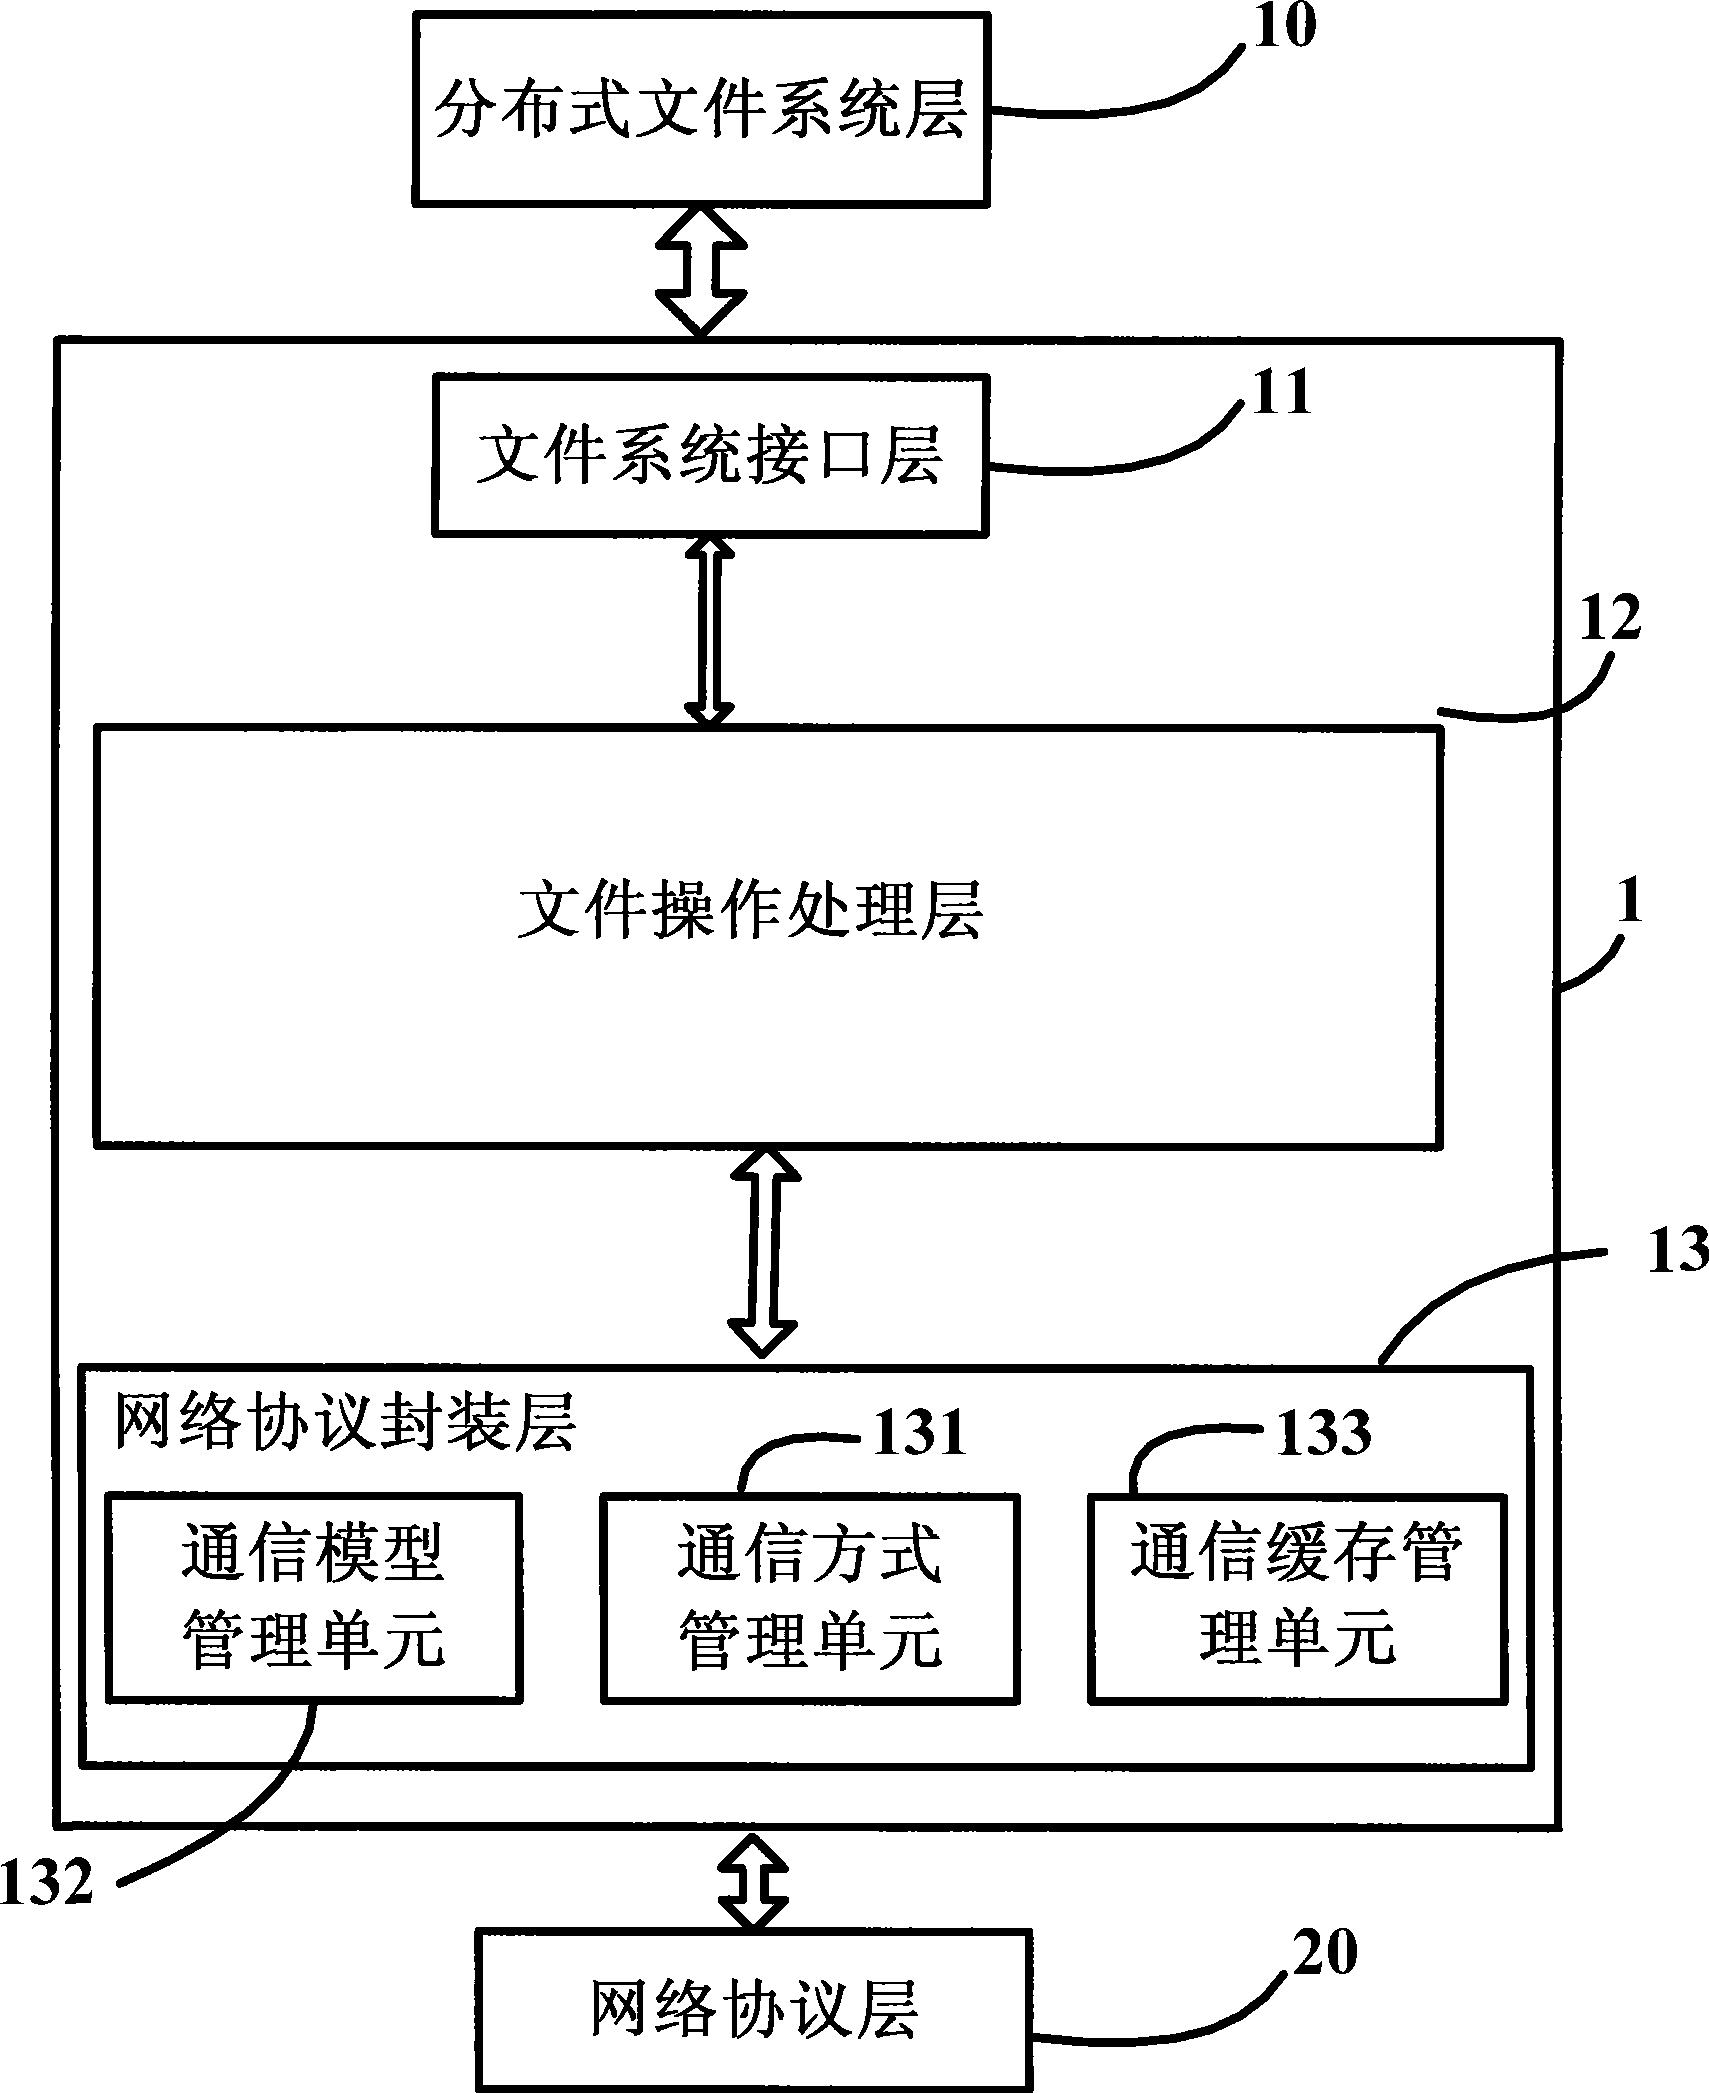 Message transmission frame and method based on high-speed network oriented to file system